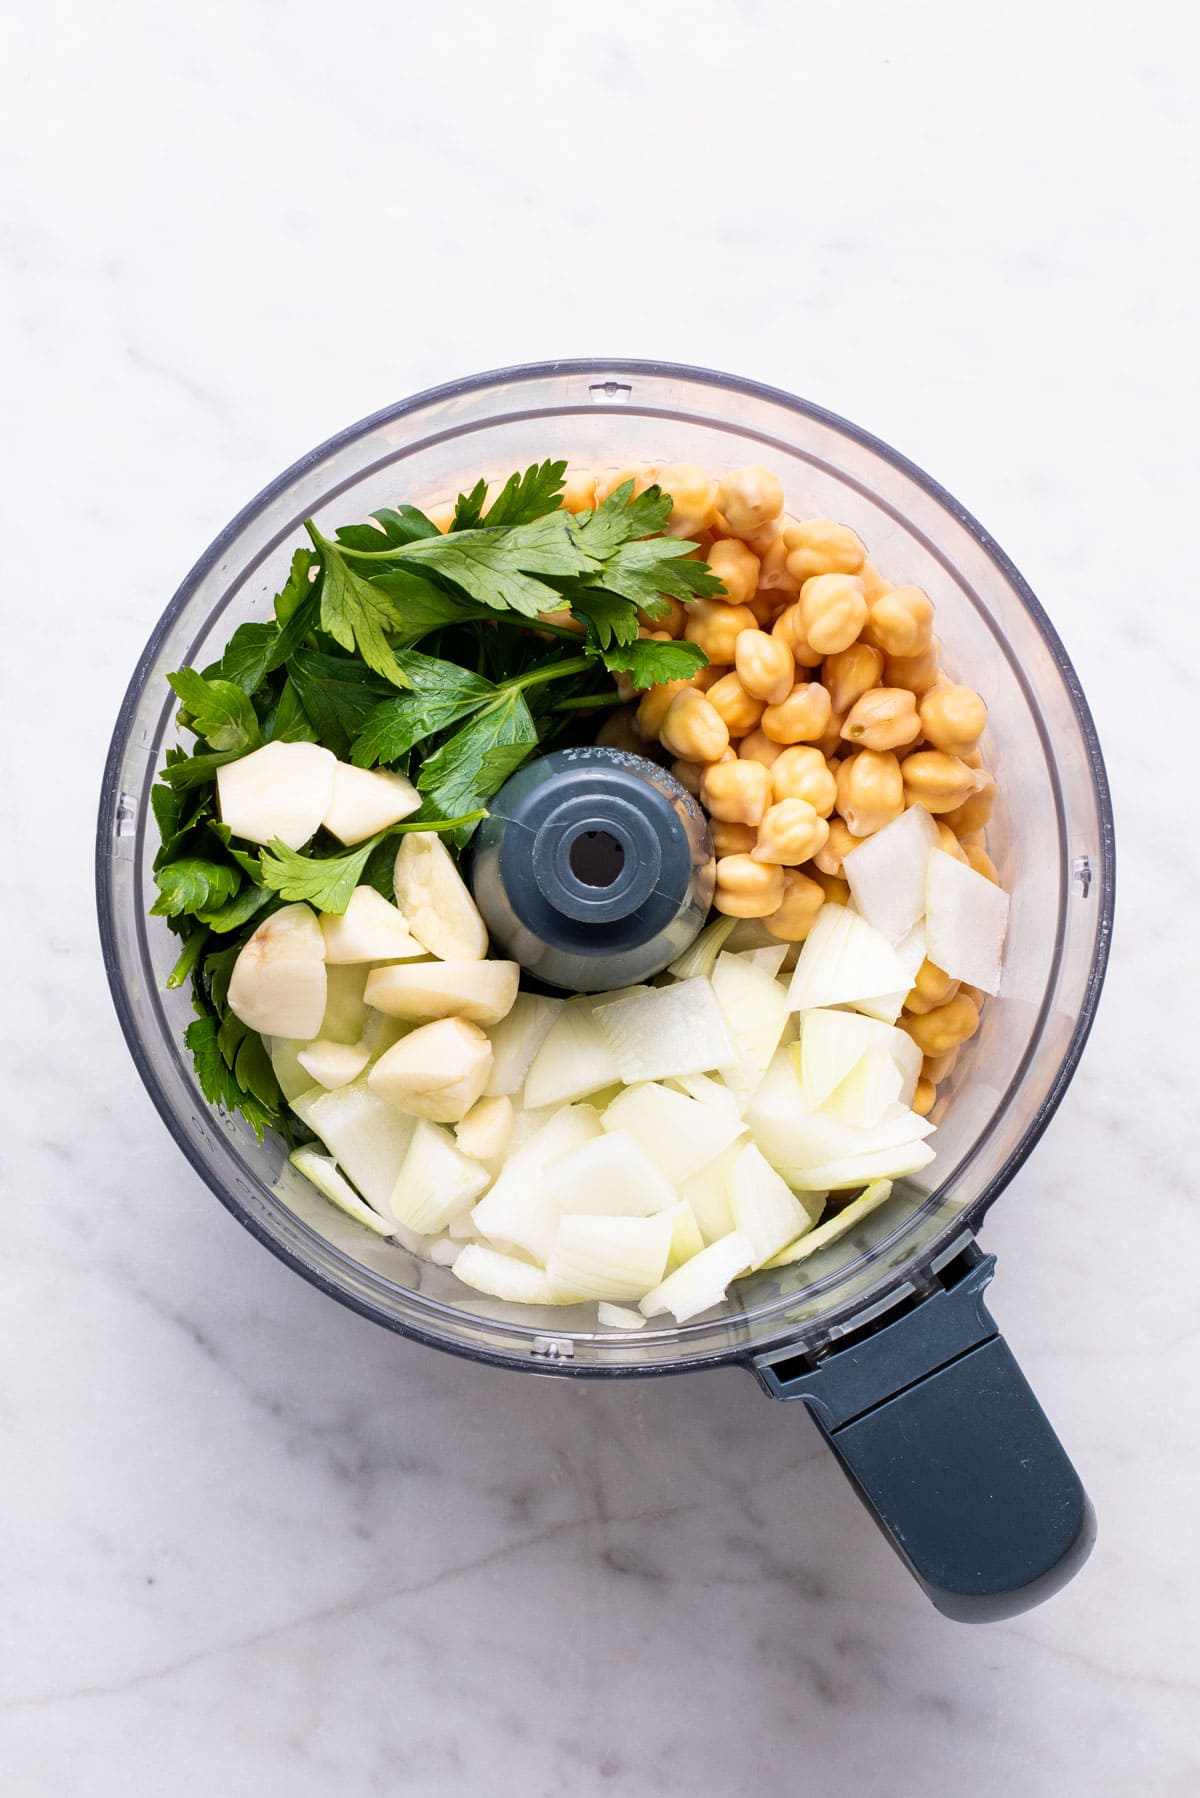 Chickpeas, parsley, garlic and onion in a food processor.